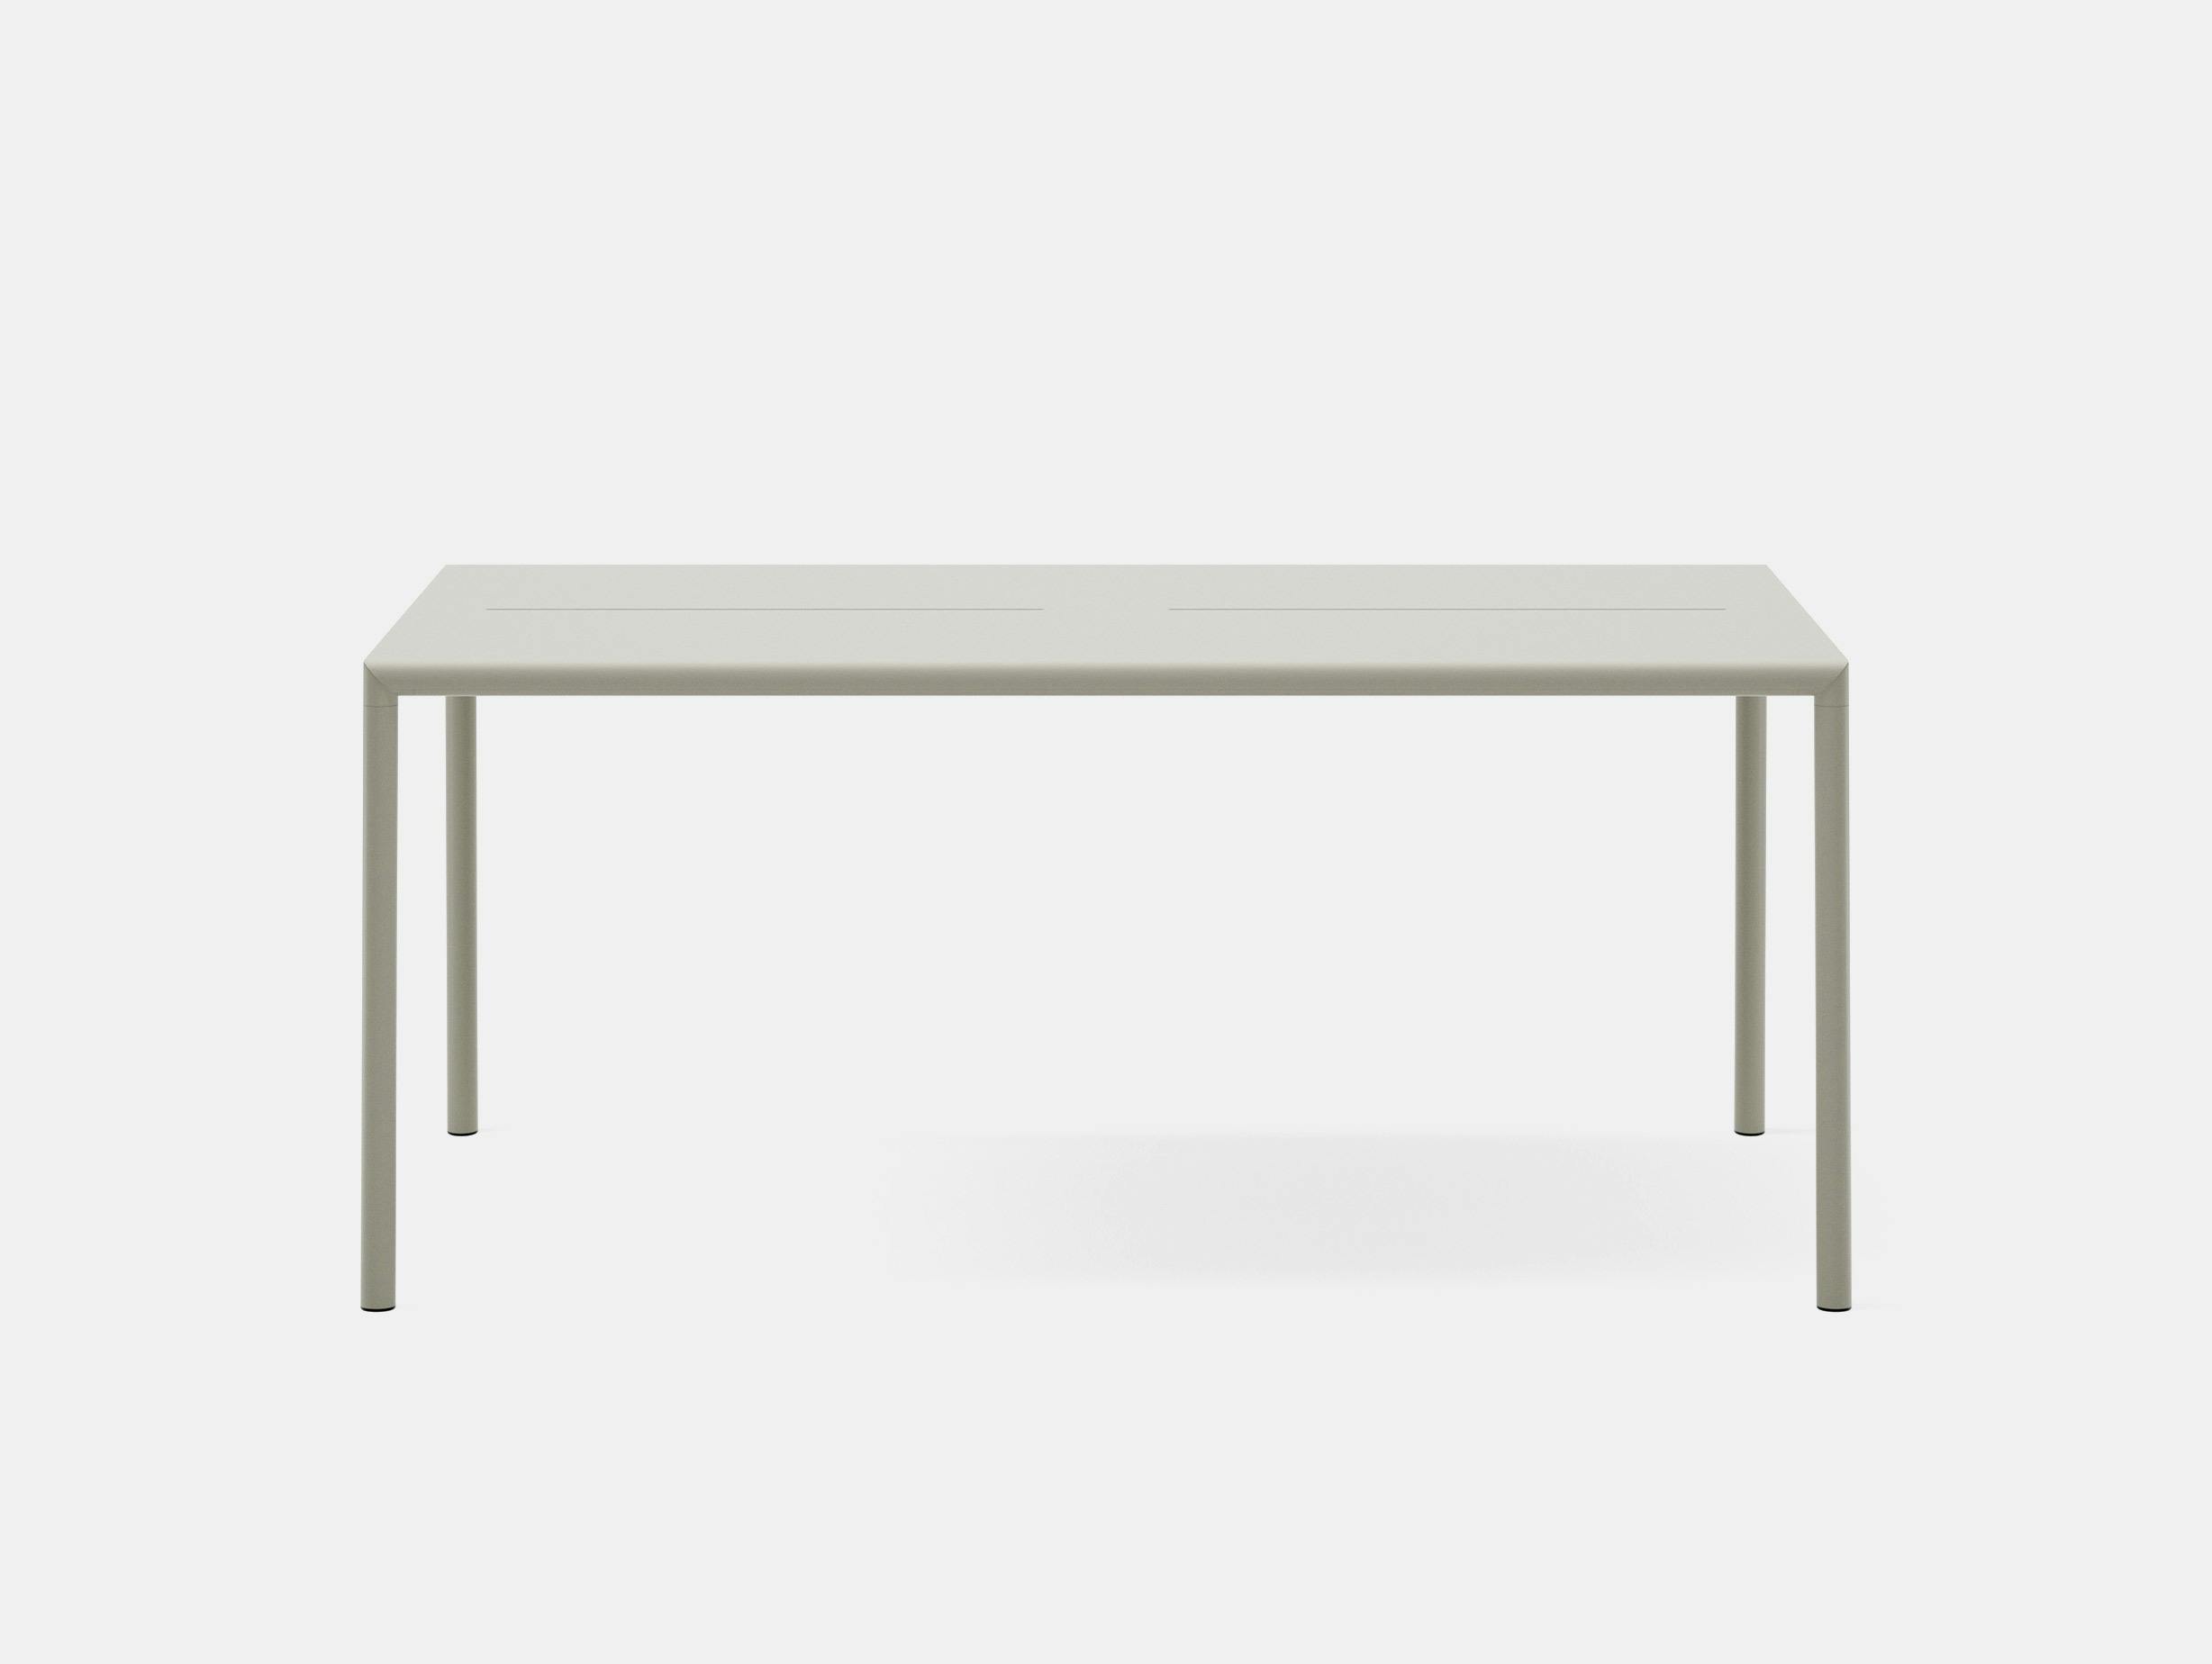 New works hannes fritz may table rectangle light grey2